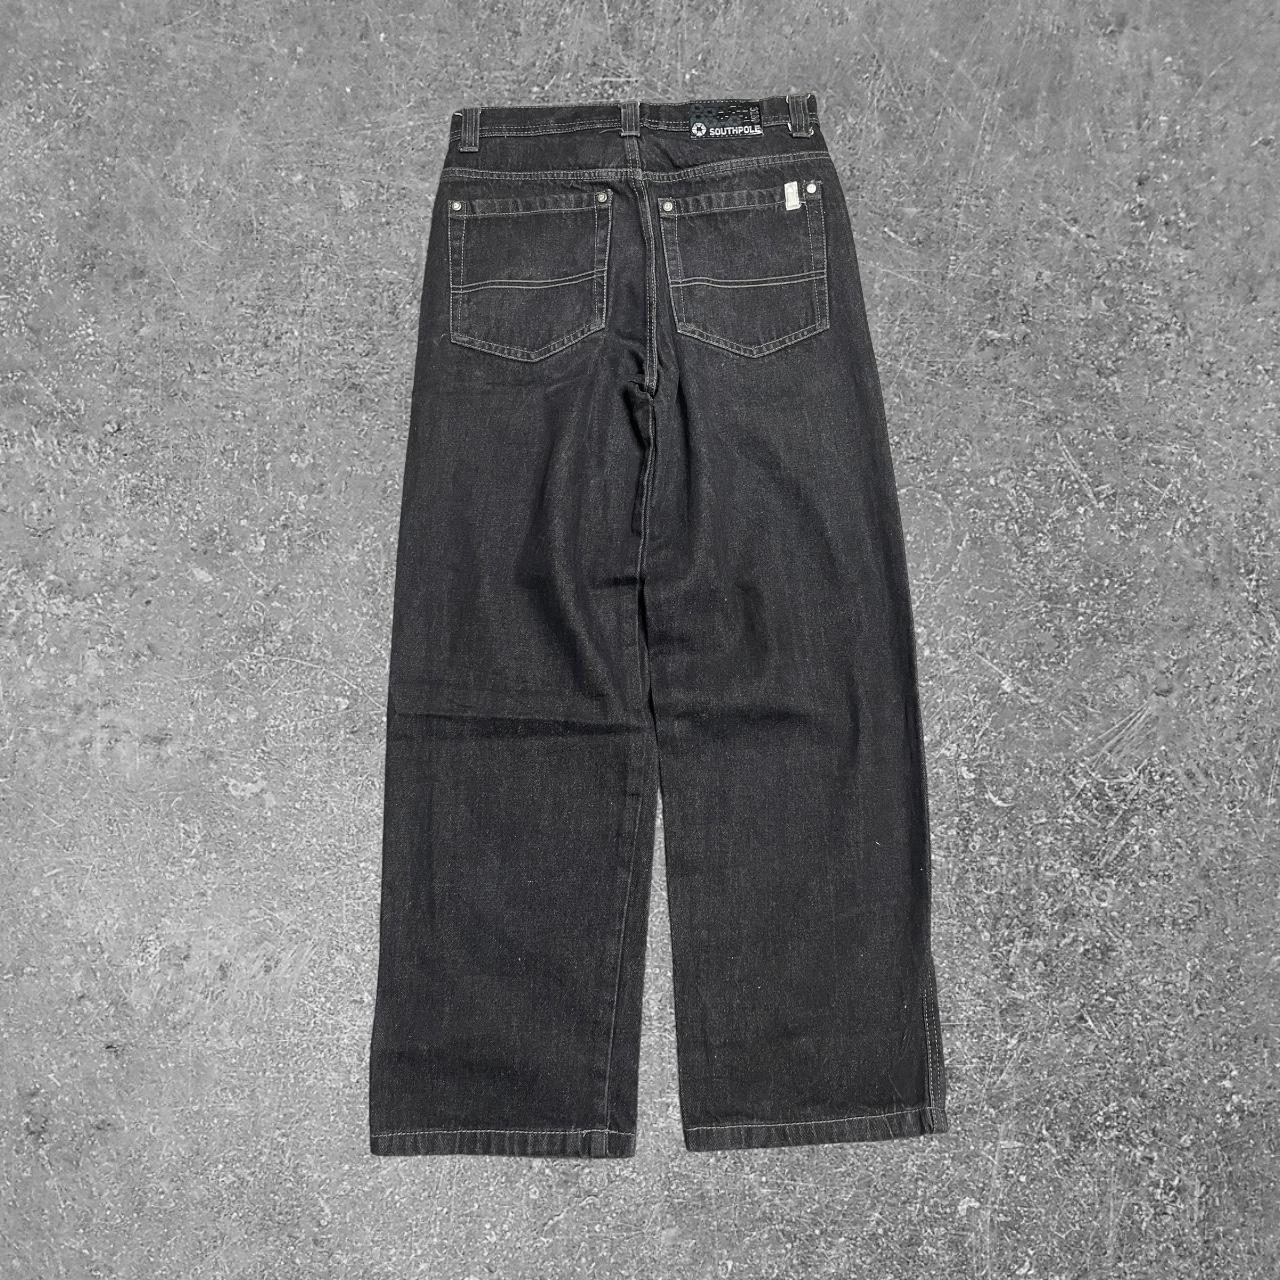 Men's Black and Grey Jeans (2)